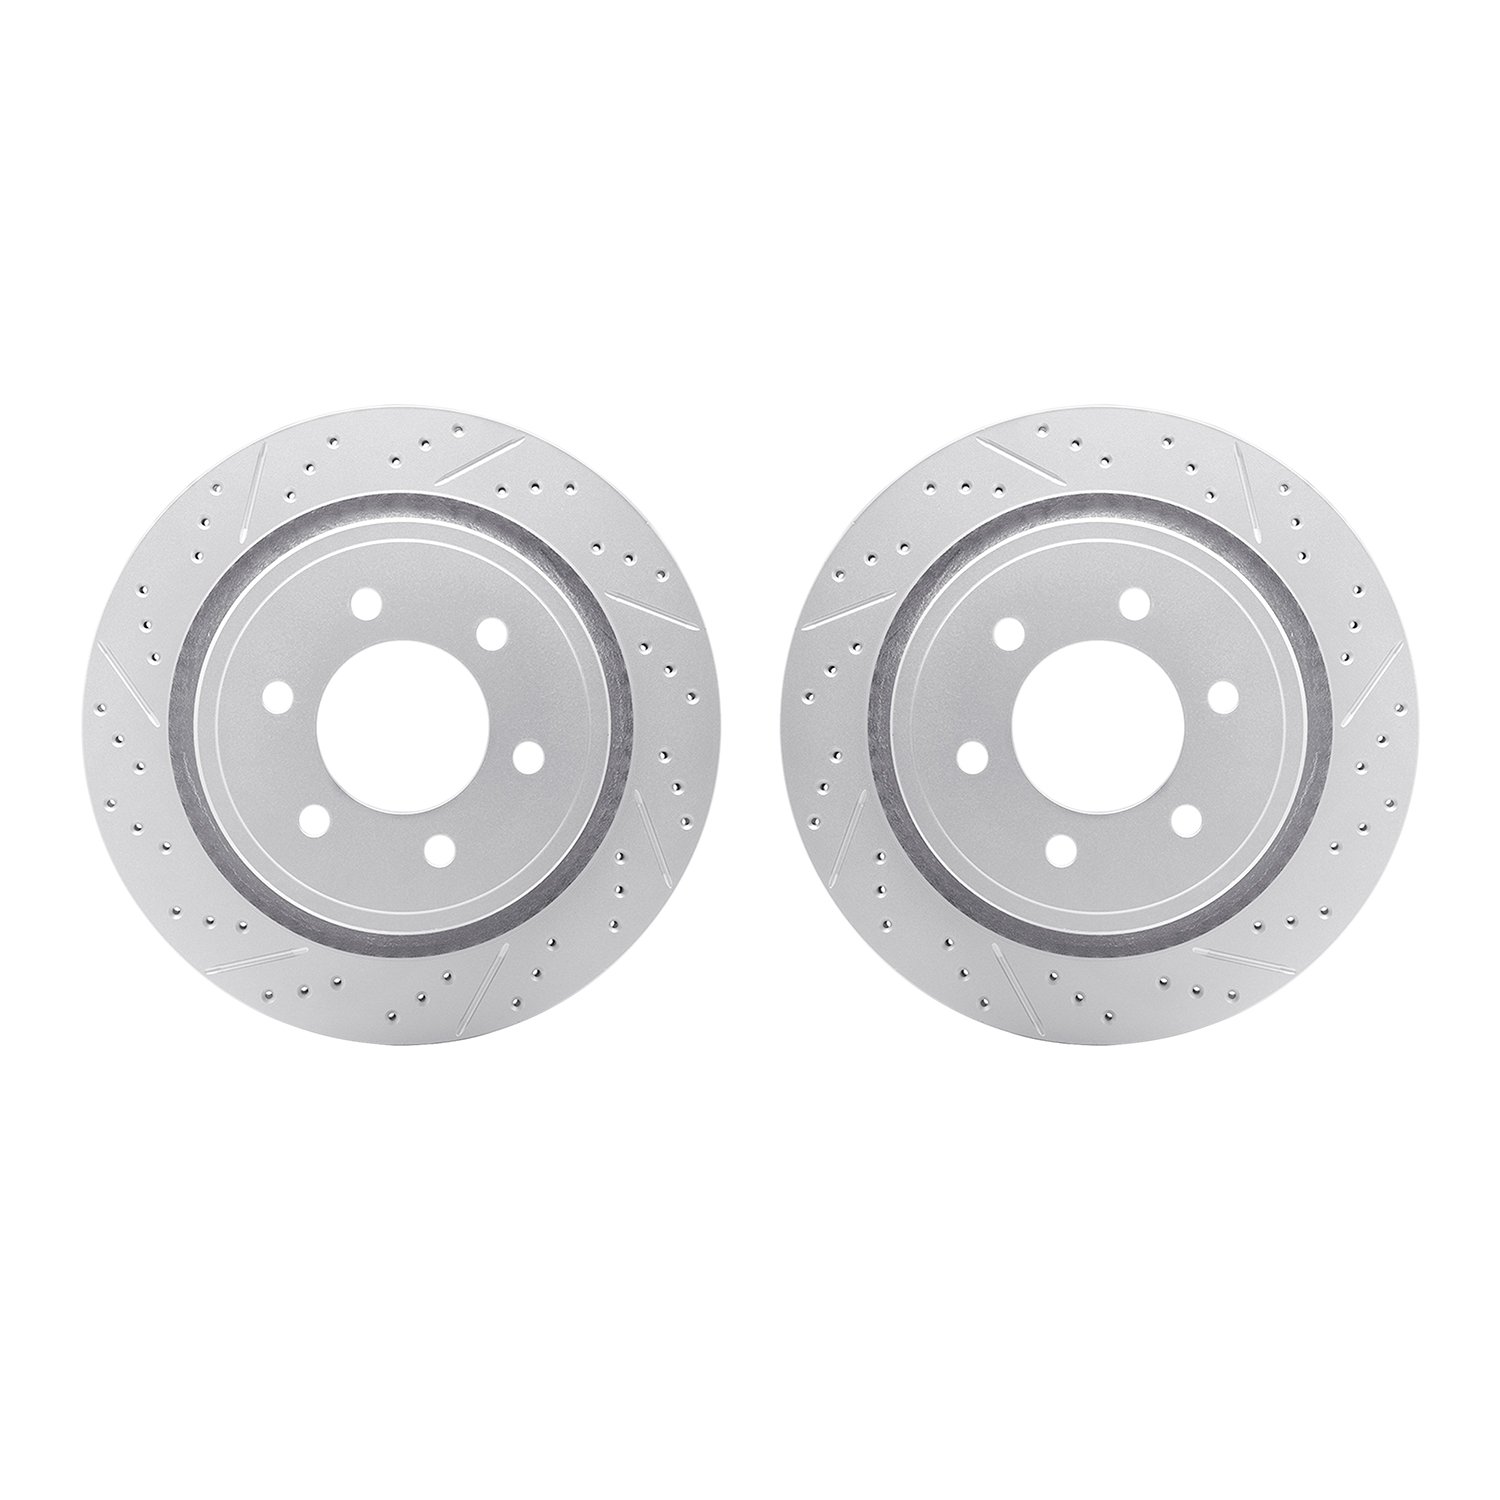 2002-54148 Geoperformance Drilled/Slotted Brake Rotors, 2012-2020 Ford/Lincoln/Mercury/Mazda, Position: Rear